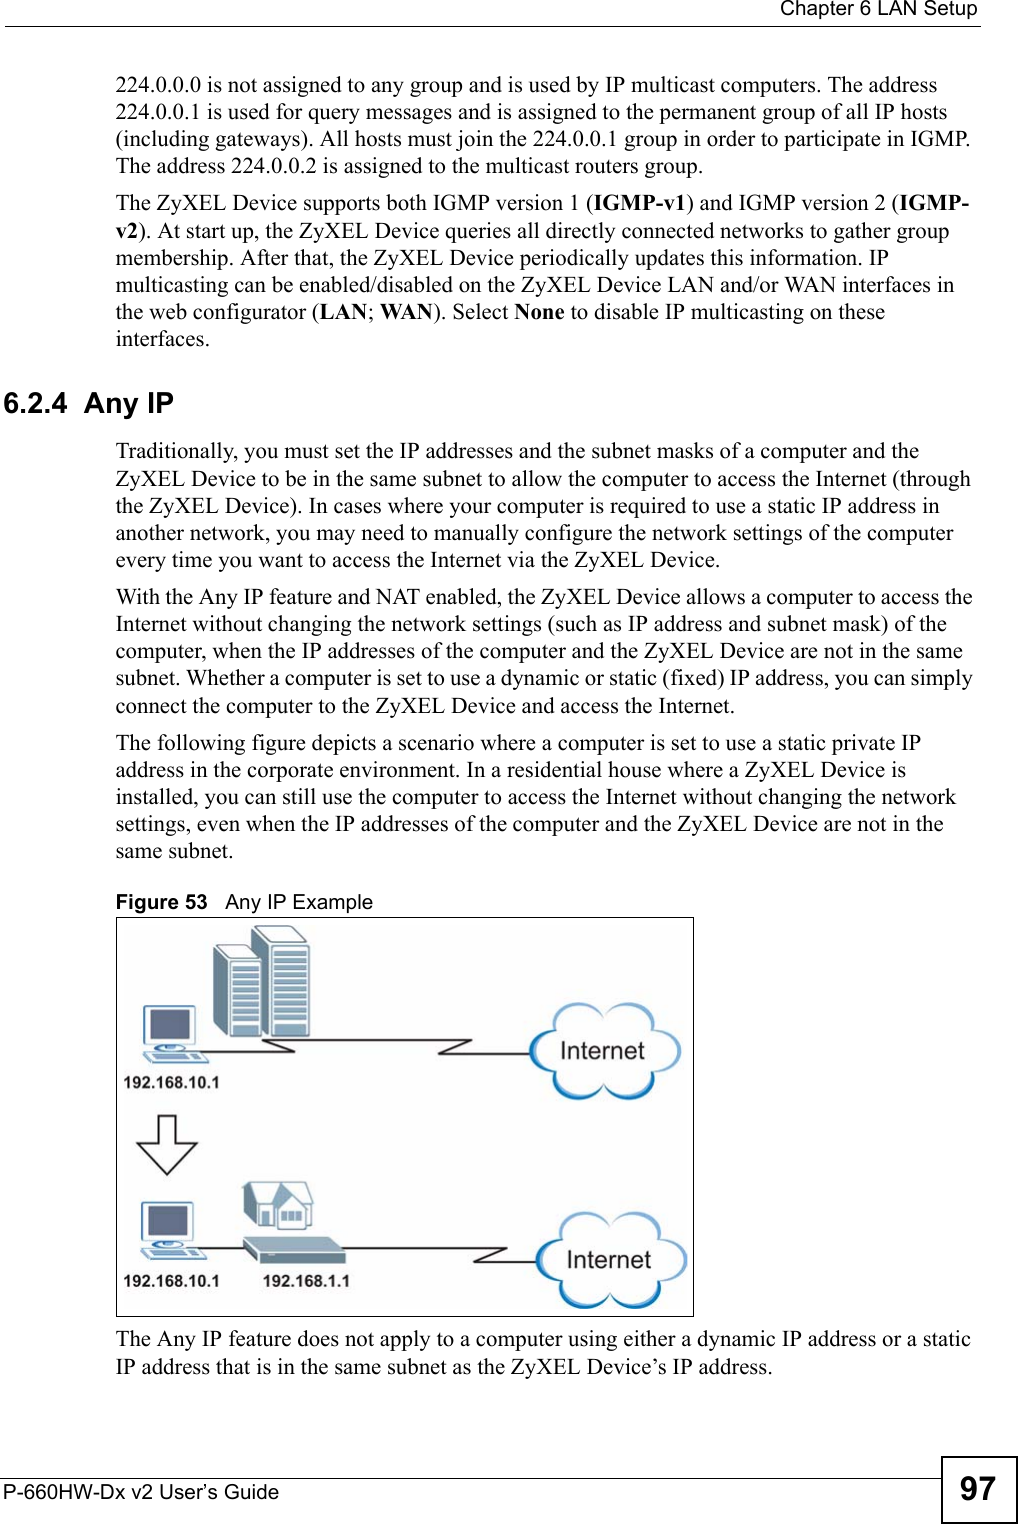  Chapter 6 LAN SetupP-660HW-Dx v2 User’s Guide 97224.0.0.0 is not assigned to any group and is used by IP multicast computers. The address 224.0.0.1 is used for query messages and is assigned to the permanent group of all IP hosts (including gateways). All hosts must join the 224.0.0.1 group in order to participate in IGMP. The address 224.0.0.2 is assigned to the multicast routers group. The ZyXEL Device supports both IGMP version 1 (IGMP-v1) and IGMP version 2 (IGMP-v2). At start up, the ZyXEL Device queries all directly connected networks to gather group membership. After that, the ZyXEL Device periodically updates this information. IP multicasting can be enabled/disabled on the ZyXEL Device LAN and/or WAN interfaces in the web configurator (LAN; WAN ). Select None to disable IP multicasting on these interfaces.6.2.4  Any IPTraditionally, you must set the IP addresses and the subnet masks of a computer and the ZyXEL Device to be in the same subnet to allow the computer to access the Internet (through the ZyXEL Device). In cases where your computer is required to use a static IP address in another network, you may need to manually configure the network settings of the computer every time you want to access the Internet via the ZyXEL Device. With the Any IP feature and NAT enabled, the ZyXEL Device allows a computer to access the Internet without changing the network settings (such as IP address and subnet mask) of the computer, when the IP addresses of the computer and the ZyXEL Device are not in the same subnet. Whether a computer is set to use a dynamic or static (fixed) IP address, you can simply connect the computer to the ZyXEL Device and access the Internet. The following figure depicts a scenario where a computer is set to use a static private IP address in the corporate environment. In a residential house where a ZyXEL Device is installed, you can still use the computer to access the Internet without changing the network settings, even when the IP addresses of the computer and the ZyXEL Device are not in the same subnet. Figure 53   Any IP ExampleThe Any IP feature does not apply to a computer using either a dynamic IP address or a static IP address that is in the same subnet as the ZyXEL Device’s IP address.